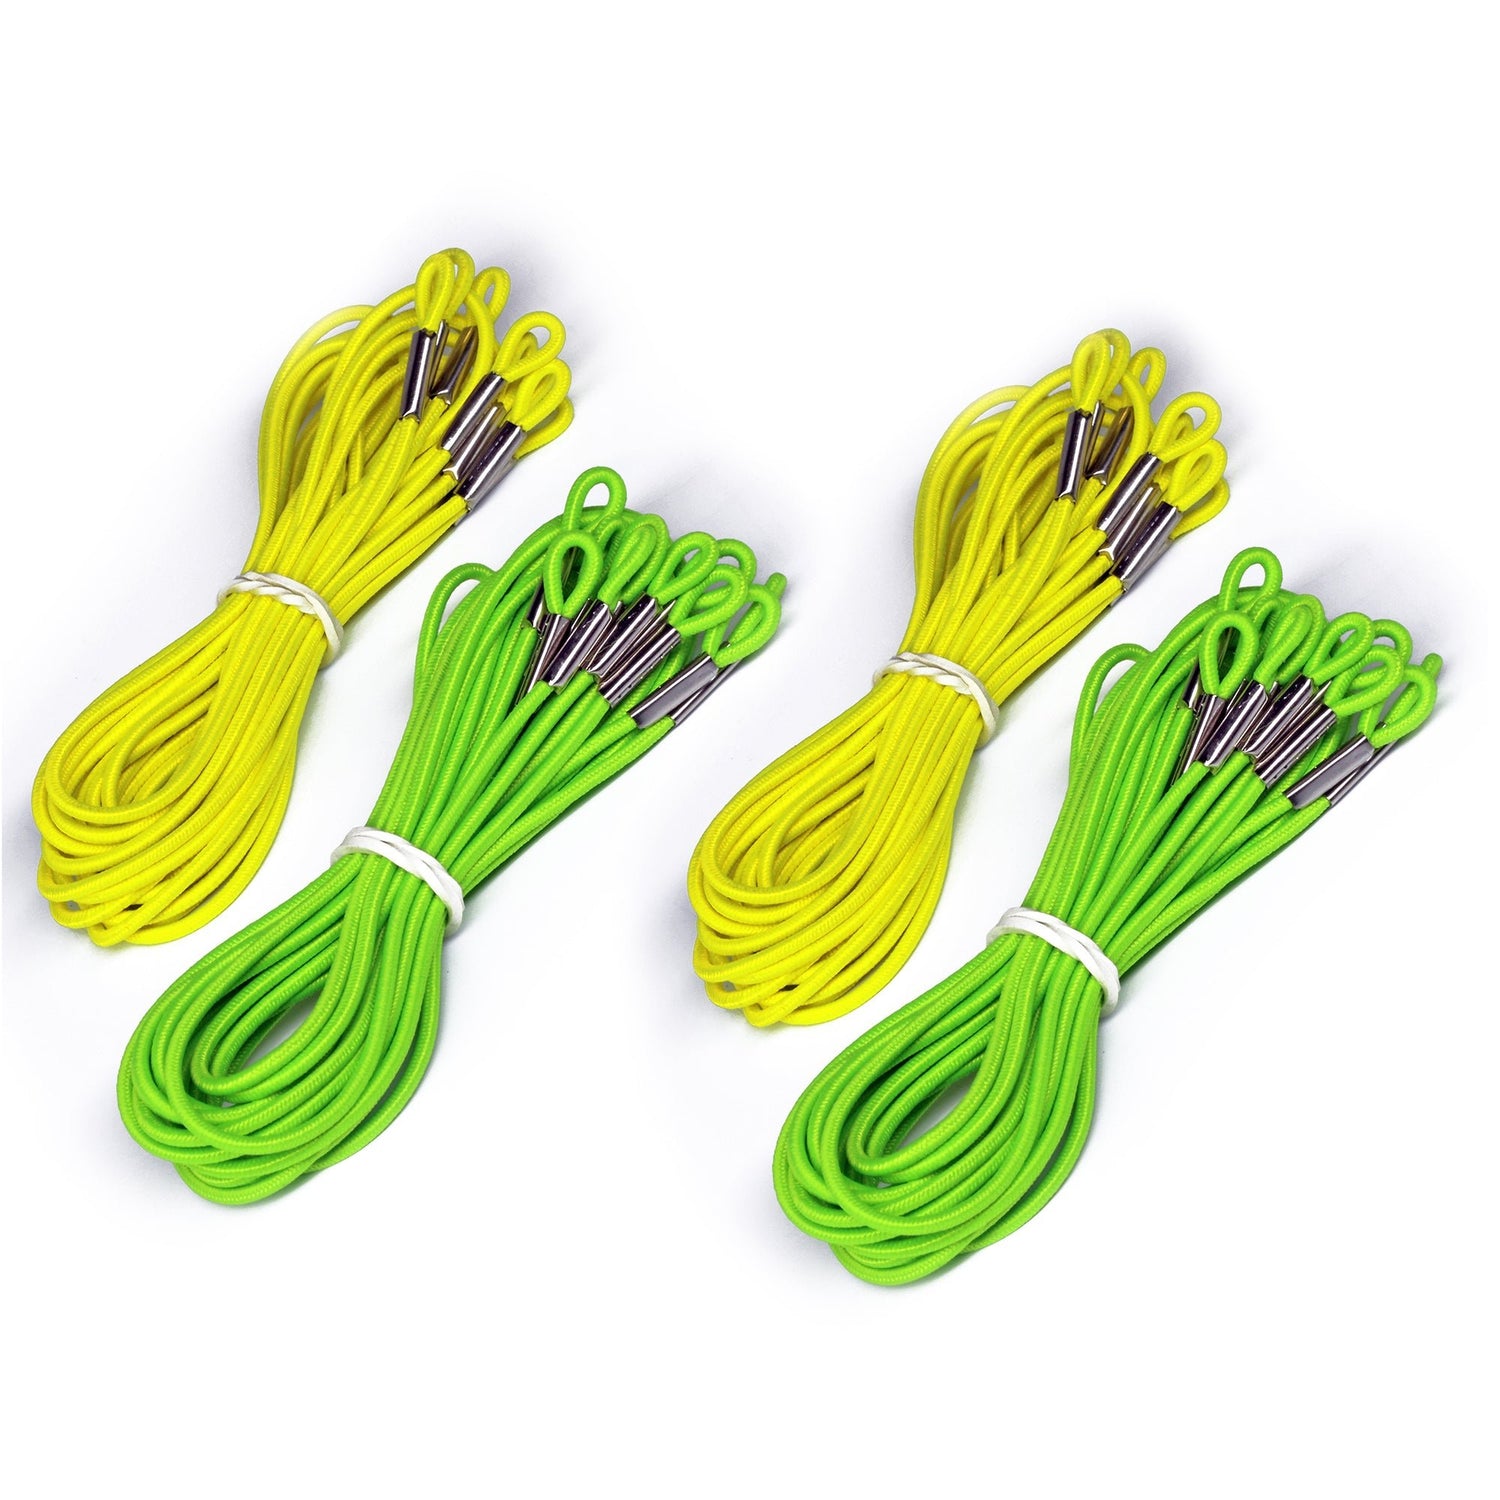 Tee Claw Mixed Pack of Green/Yellow Lanyards - Big Horn Golfer